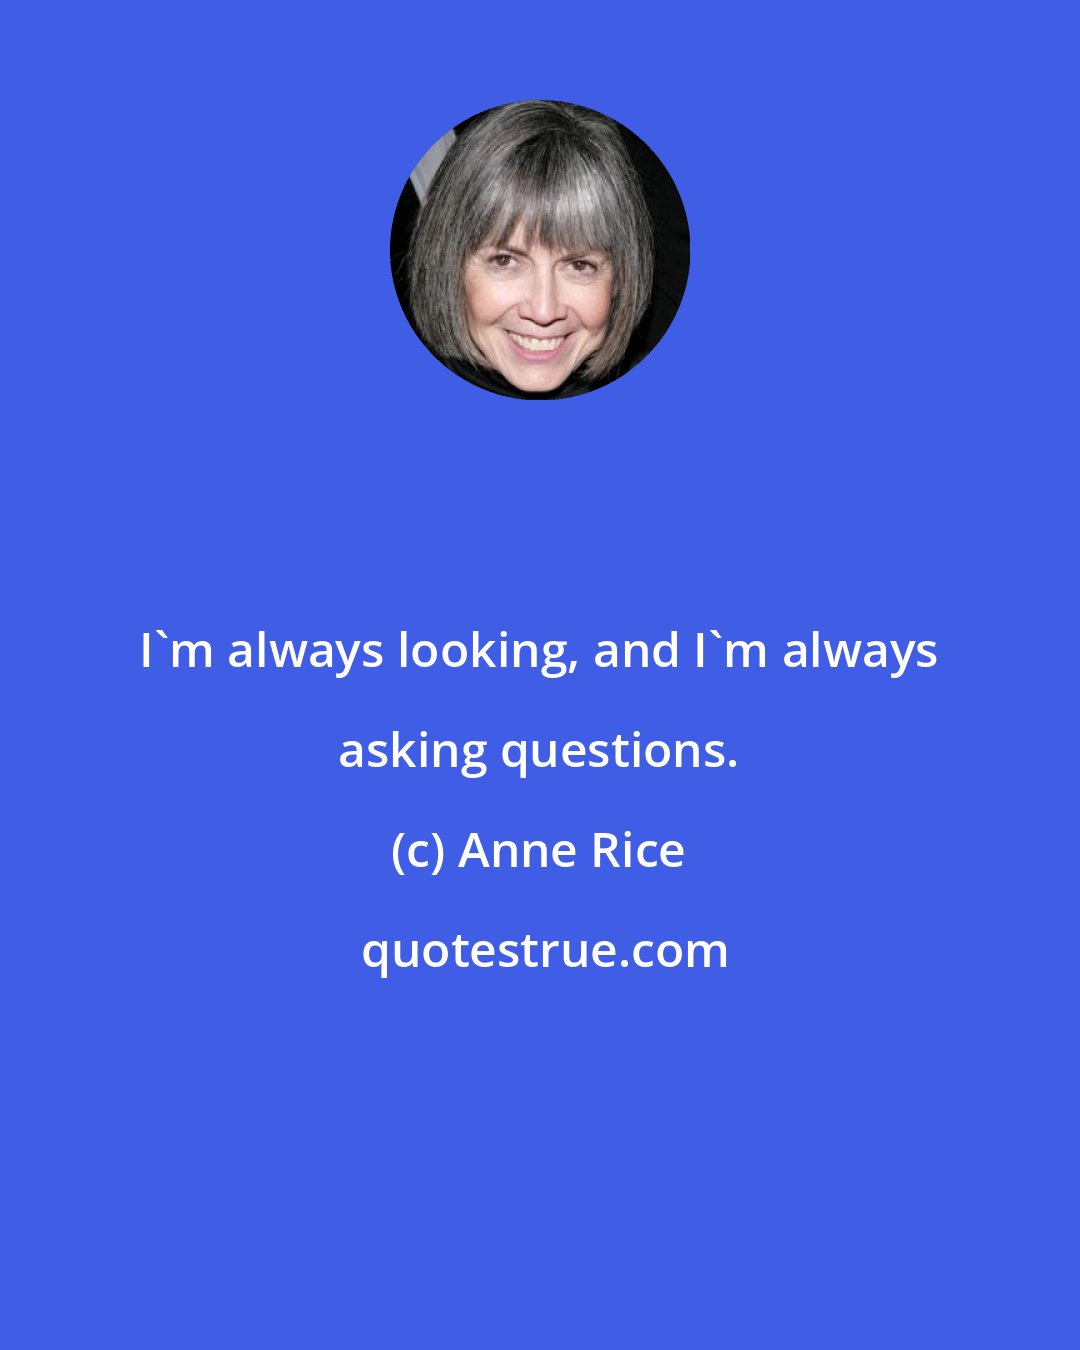 Anne Rice: I'm always looking, and I'm always asking questions.